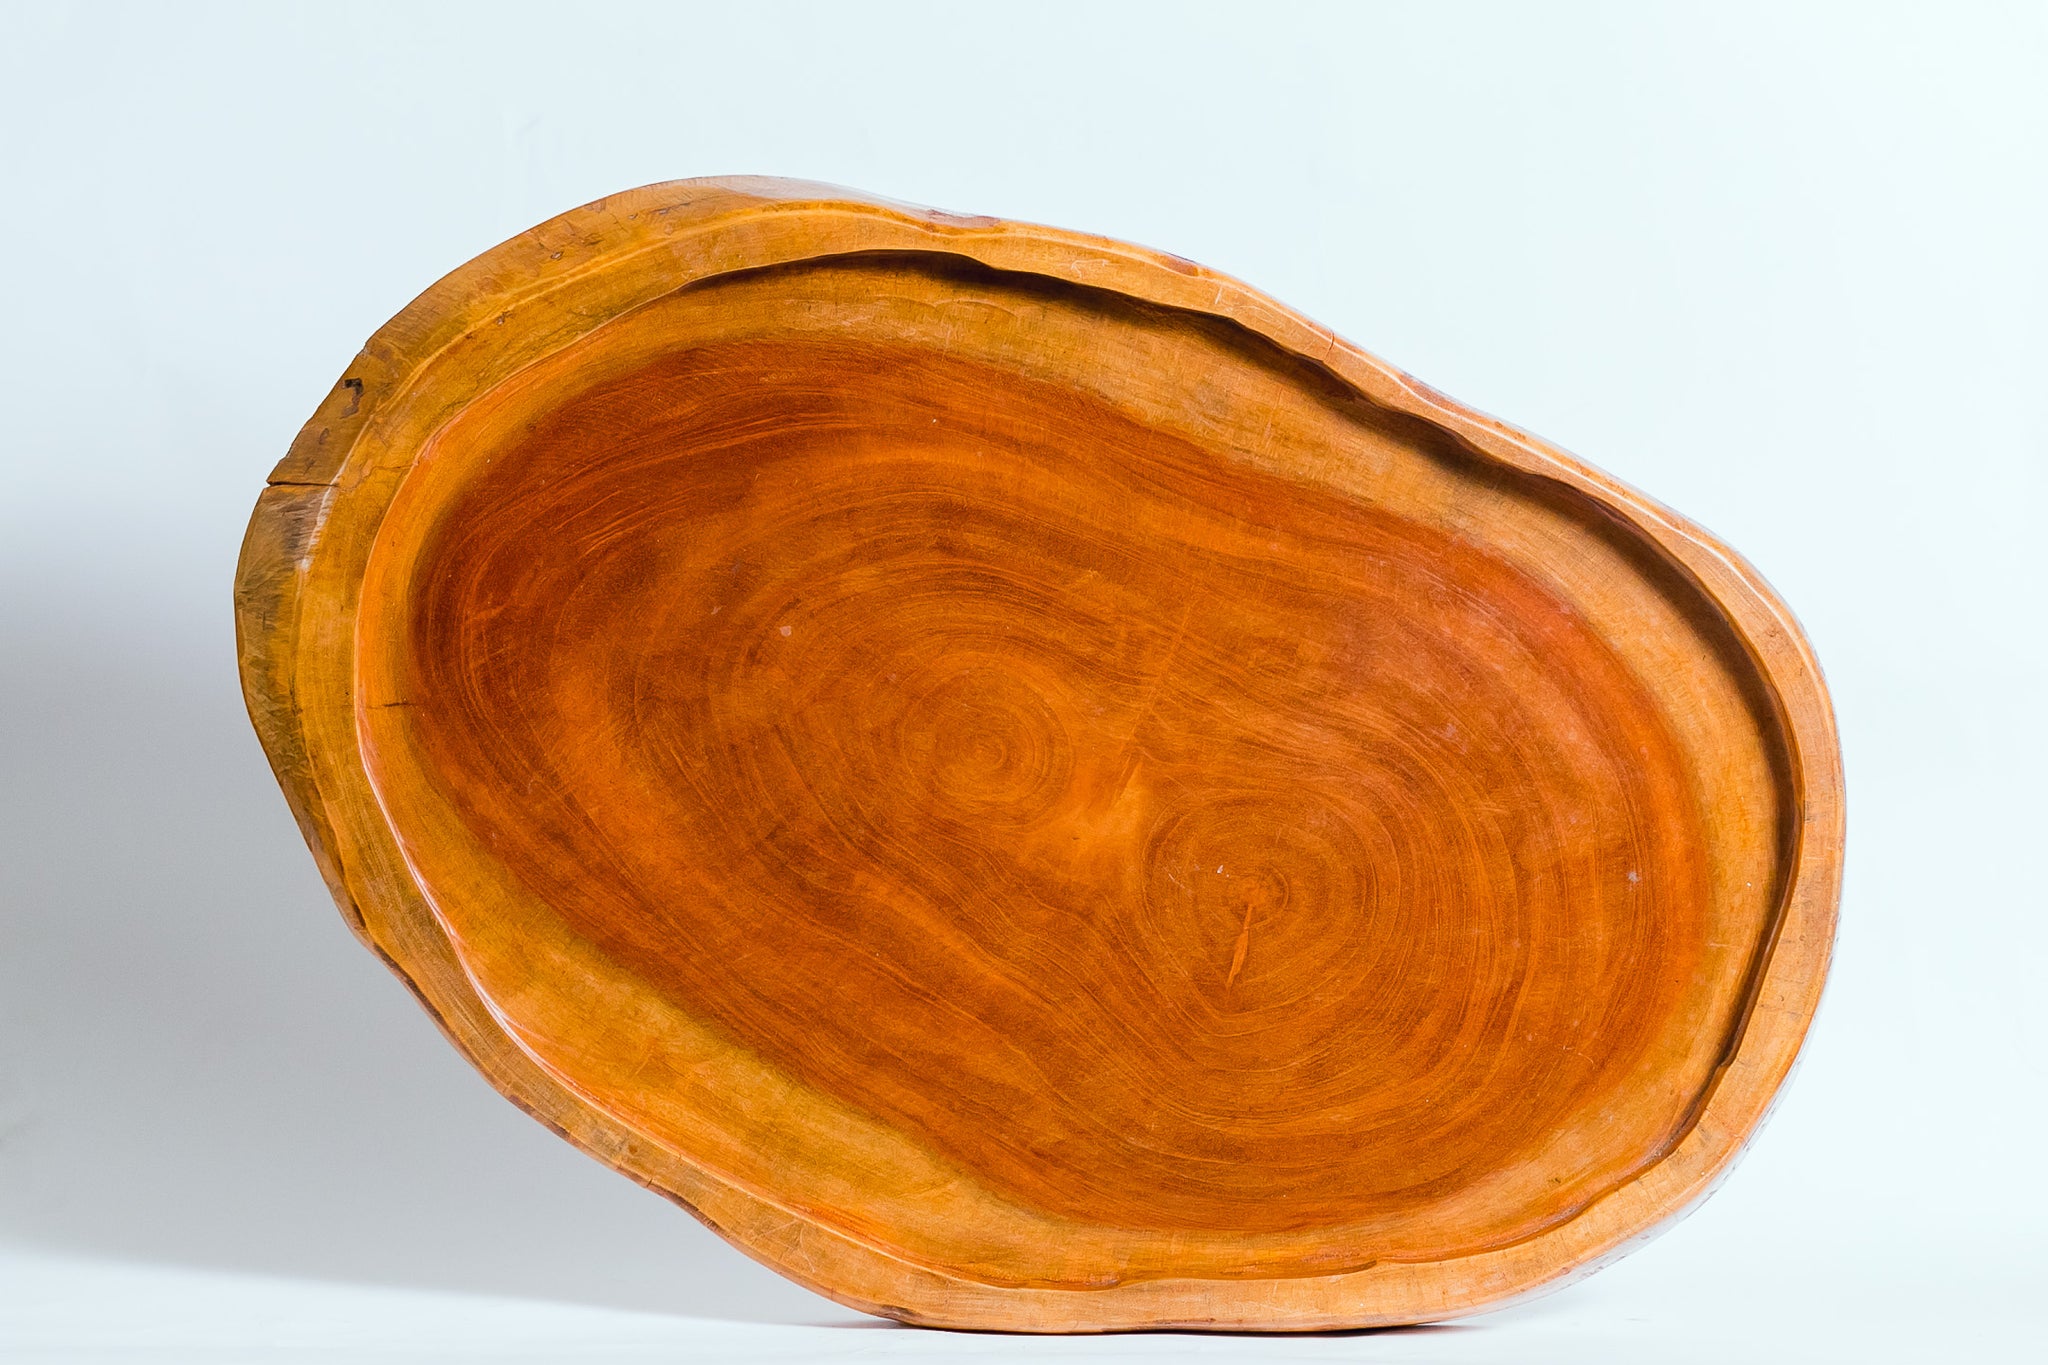 Tray-large-sized, hand-carved of teak wood, Ghana, West Africa